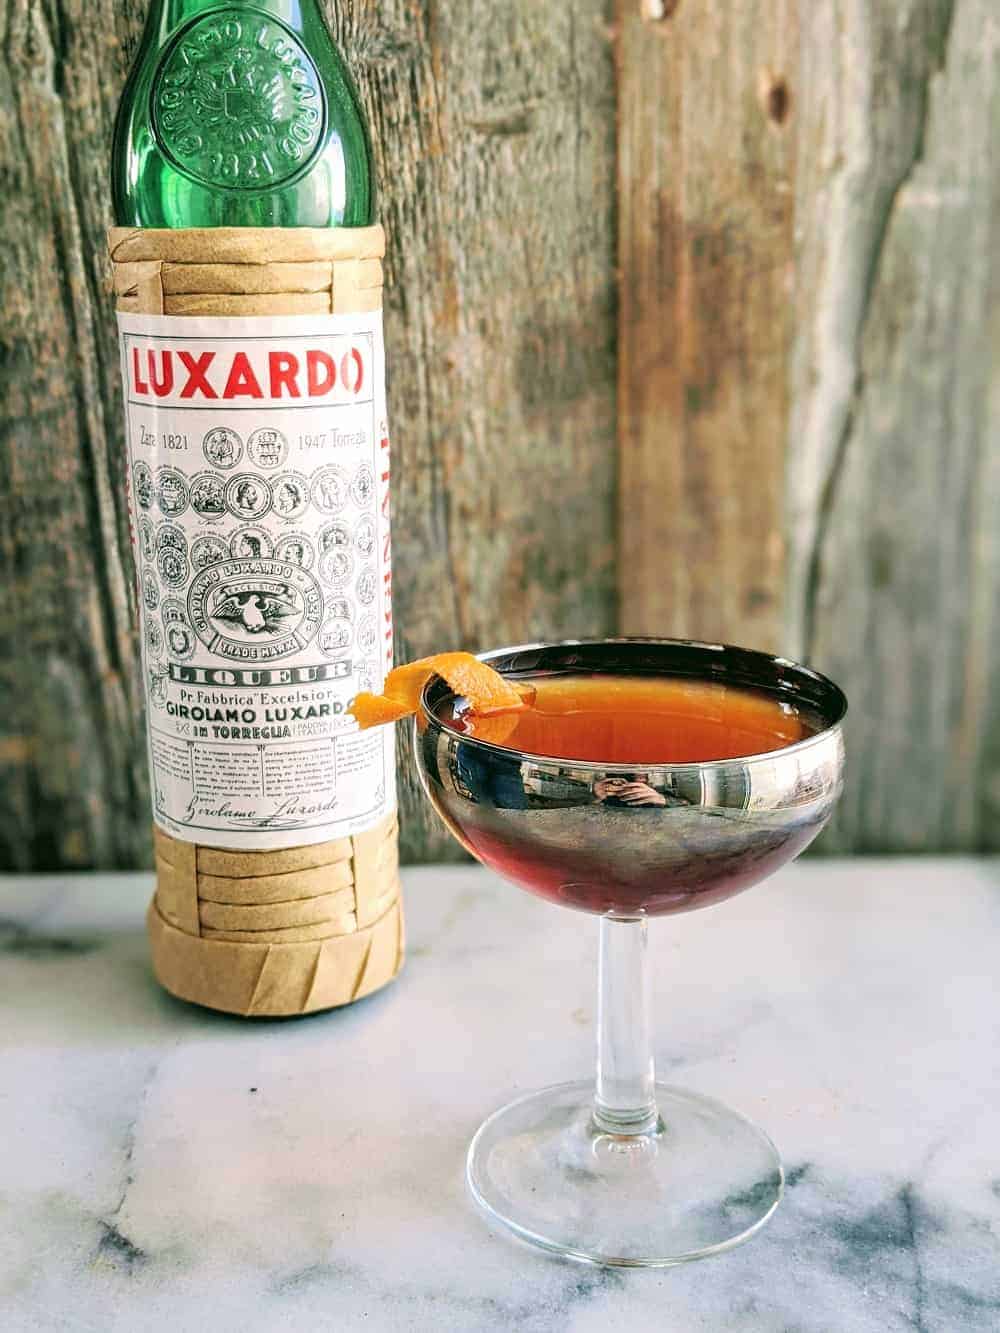 Martinez Cocktail in a silver coupe glass with a bottle of Luxardo behind it